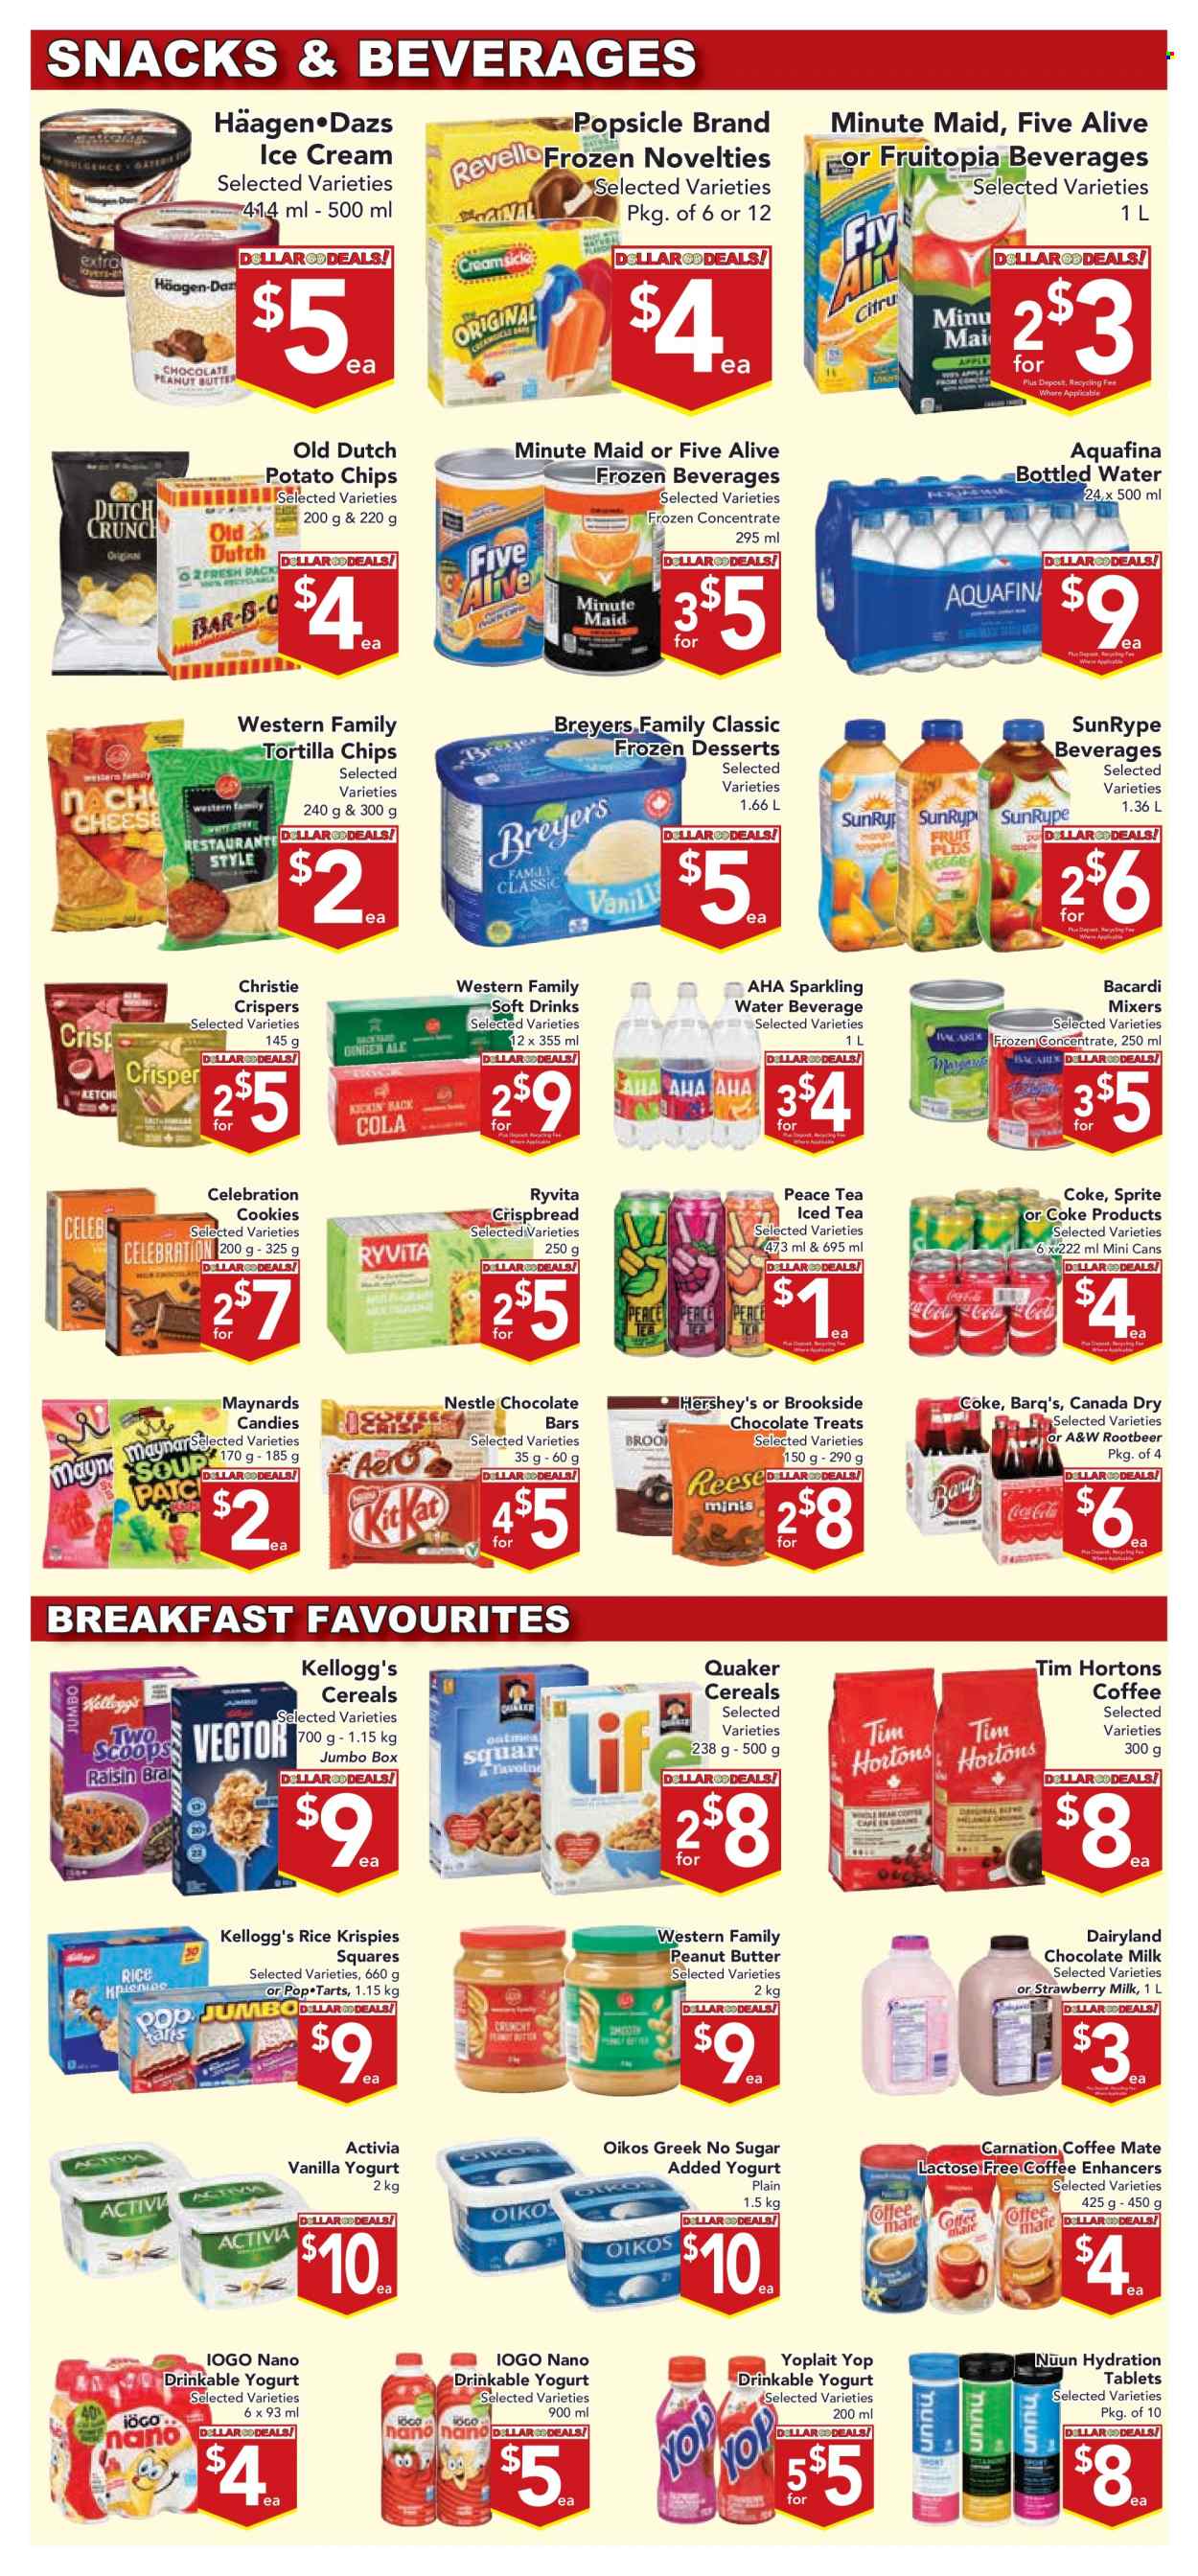 thumbnail - Buy-Low Foods Flyer - January 26, 2023 - February 01, 2023 - Sales products - crispbread, soup, Quaker, cheese, yoghurt, Activia, Oikos, Yoplait, Coffee-Mate, milk, ice cream, Hershey's, Häagen-Dazs, cookies, milk chocolate, snack, Celebration, Kellogg's, Pop-Tarts, chocolate bar, tortilla chips, potato chips, cereals, Rice Krispies, peanut butter, Canada Dry, Coca-Cola, ginger ale, Sprite, ice tea, soft drink, A&W, fruit punch, Aquafina, sparkling water, bottled water, Bacardi, Nestlé. Page 6.